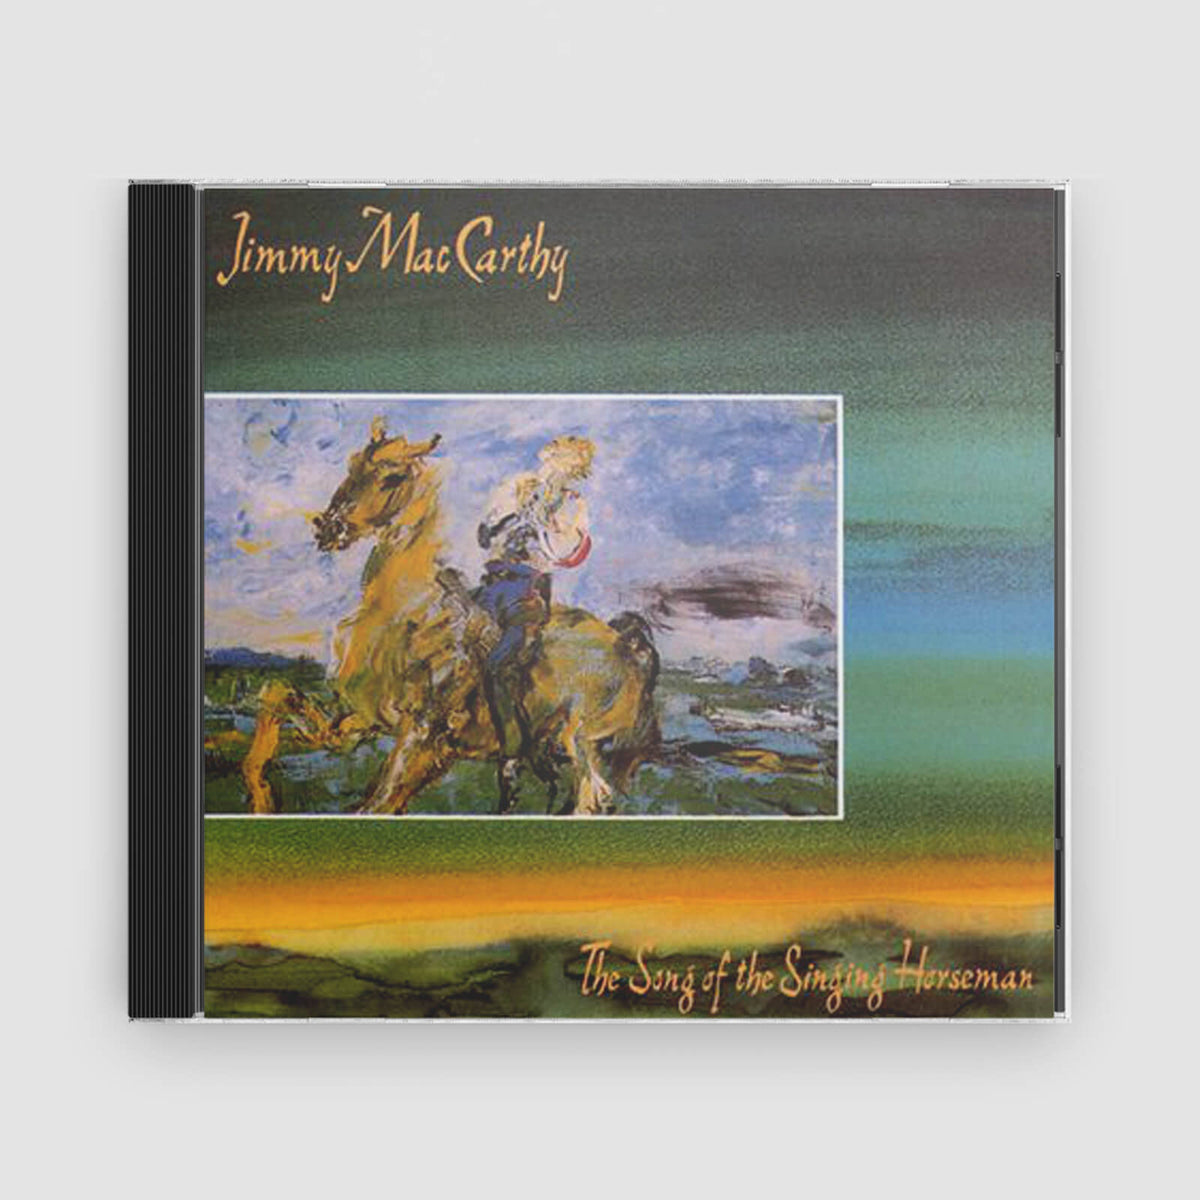 Jimmy MacCarthy : The Song of the Singing Horsemen